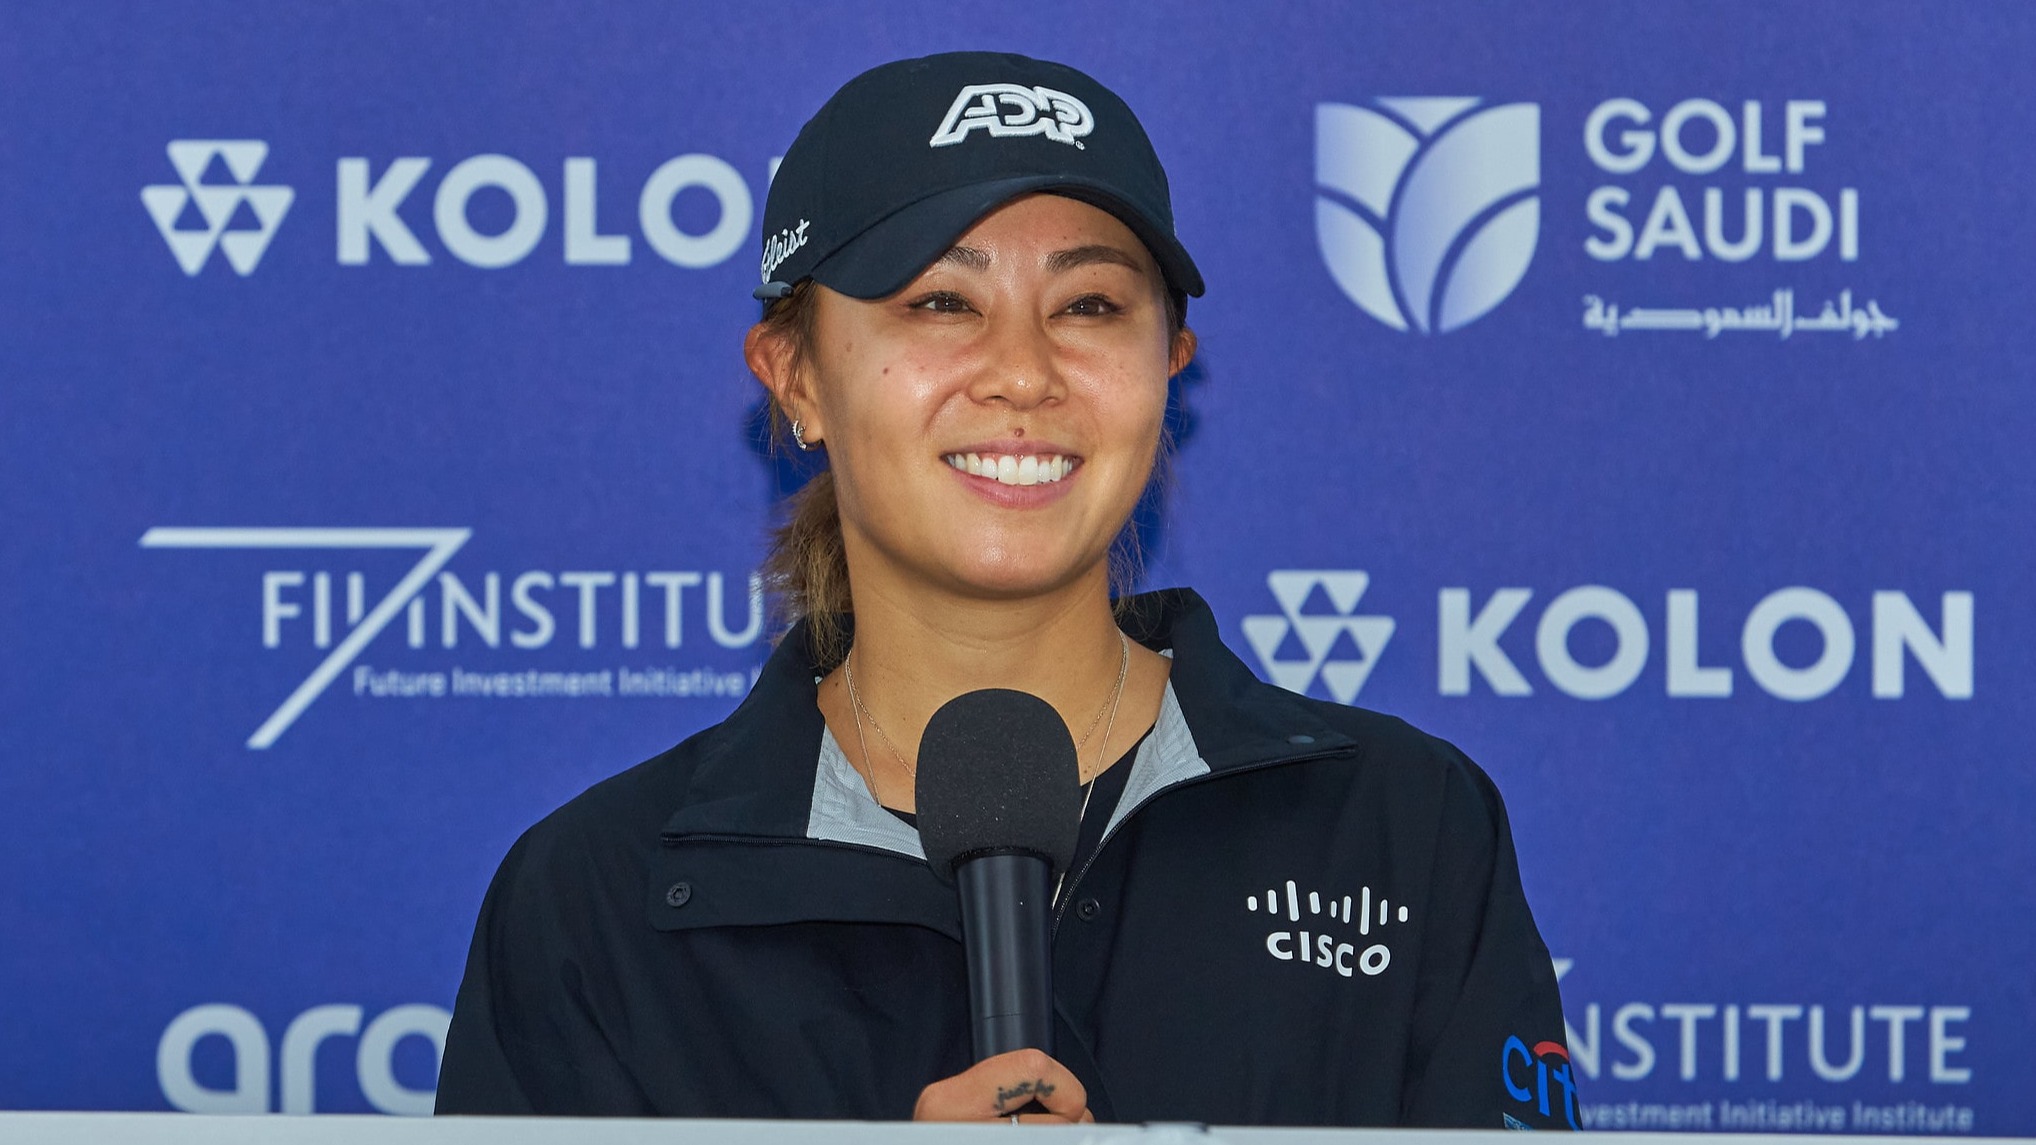 Danielle Kang at speaking at the press conference